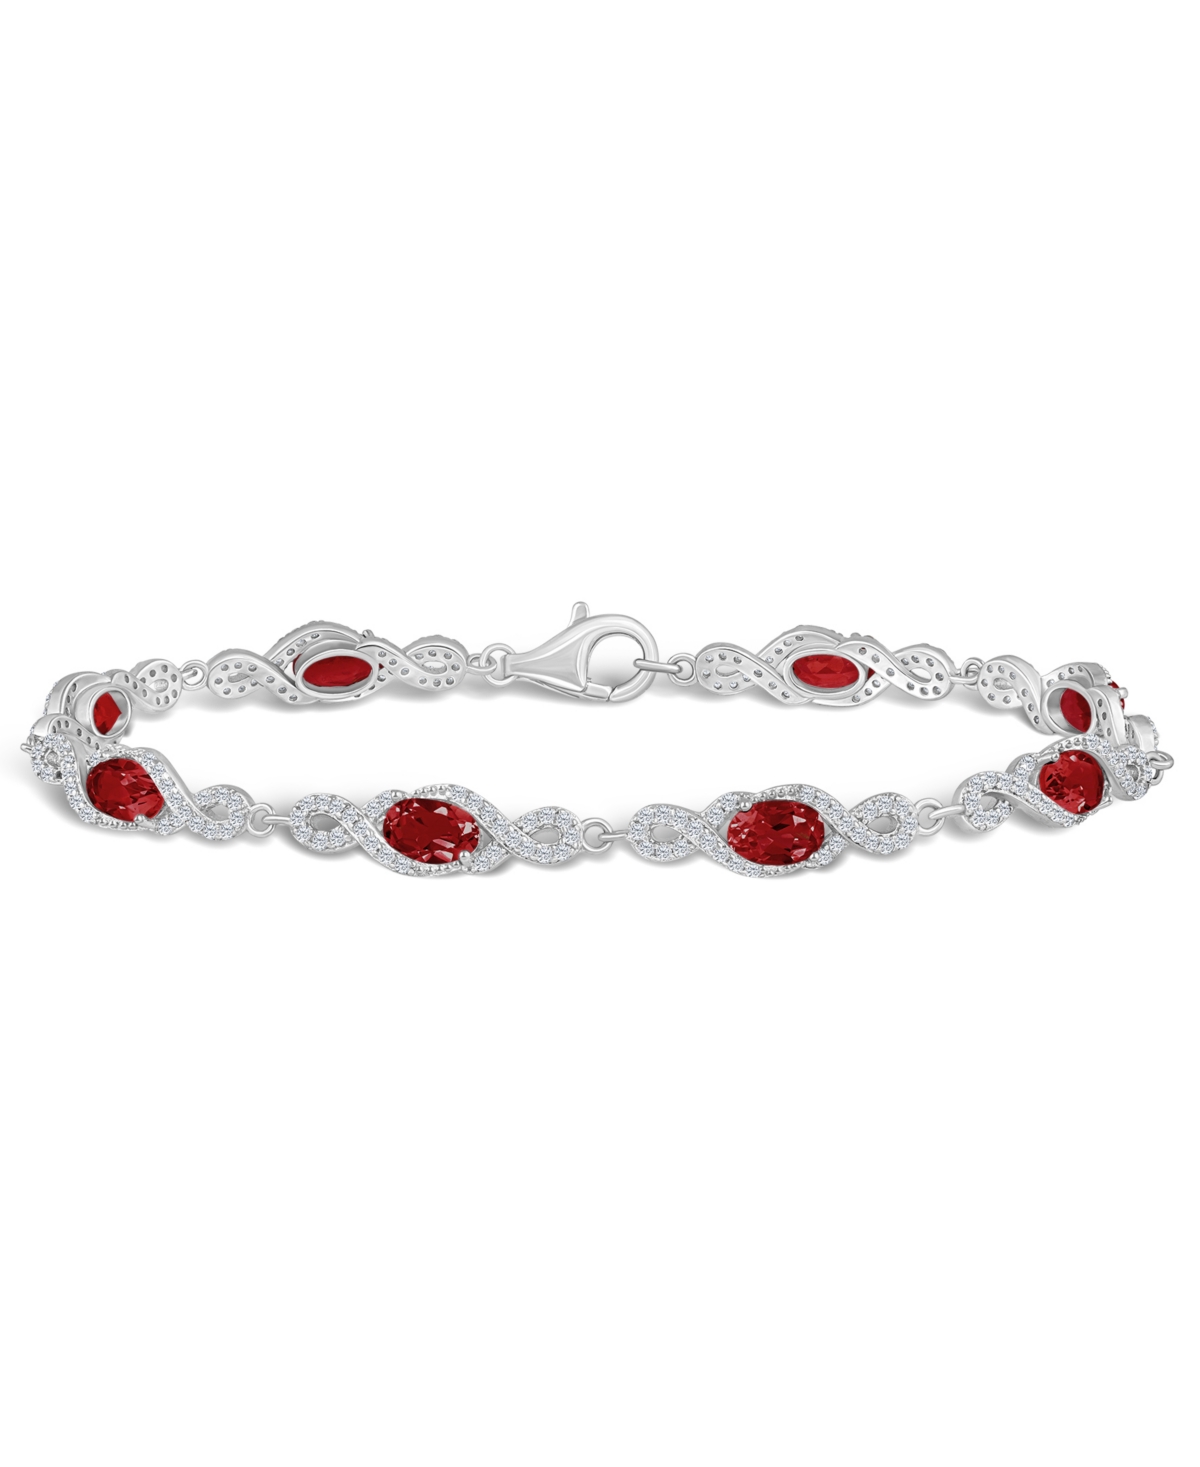 Macy's Garnet And White Topaz Bracelet (4-5/8 Ct. T.w And 2 Ct. T.w) In Sterling Silver